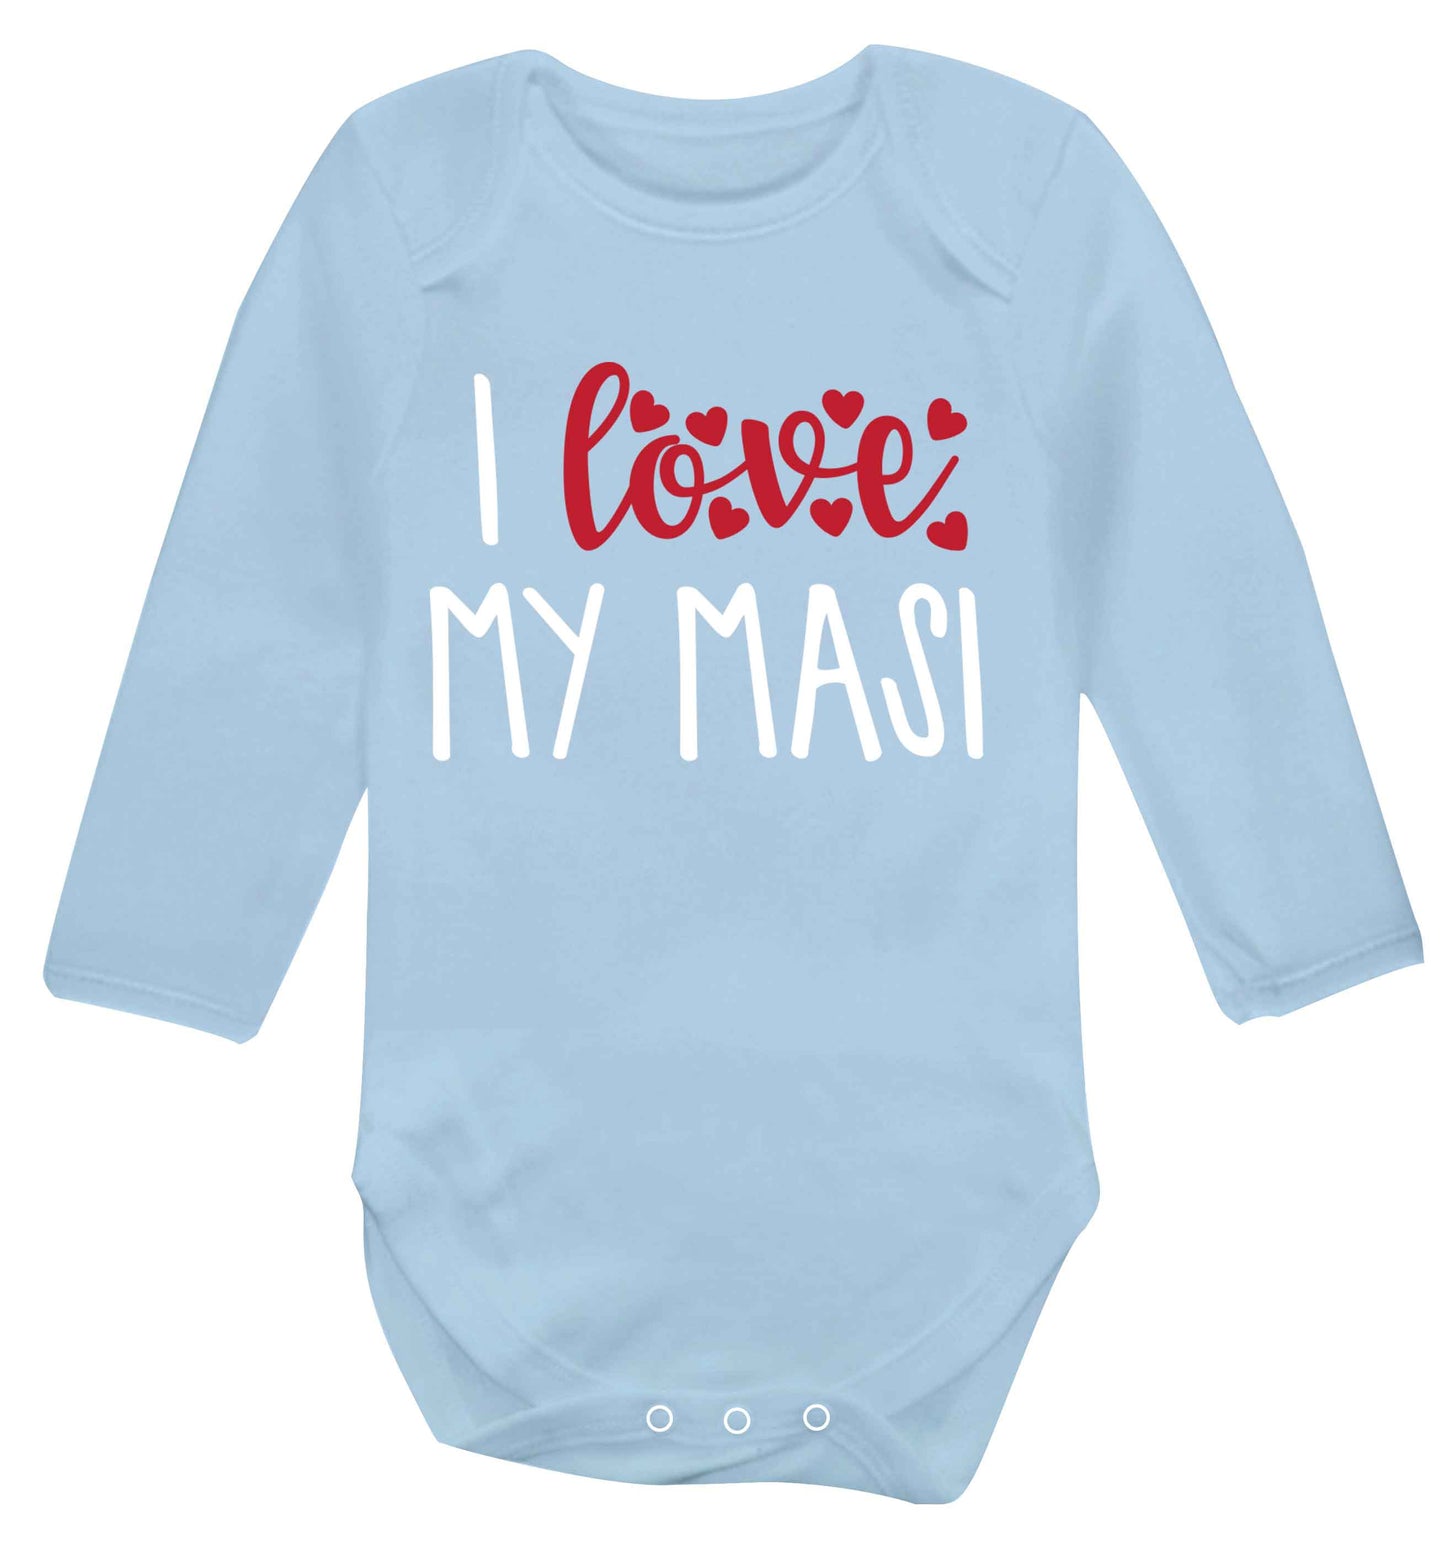 I love my masi Baby Vest long sleeved pale blue 6-12 months